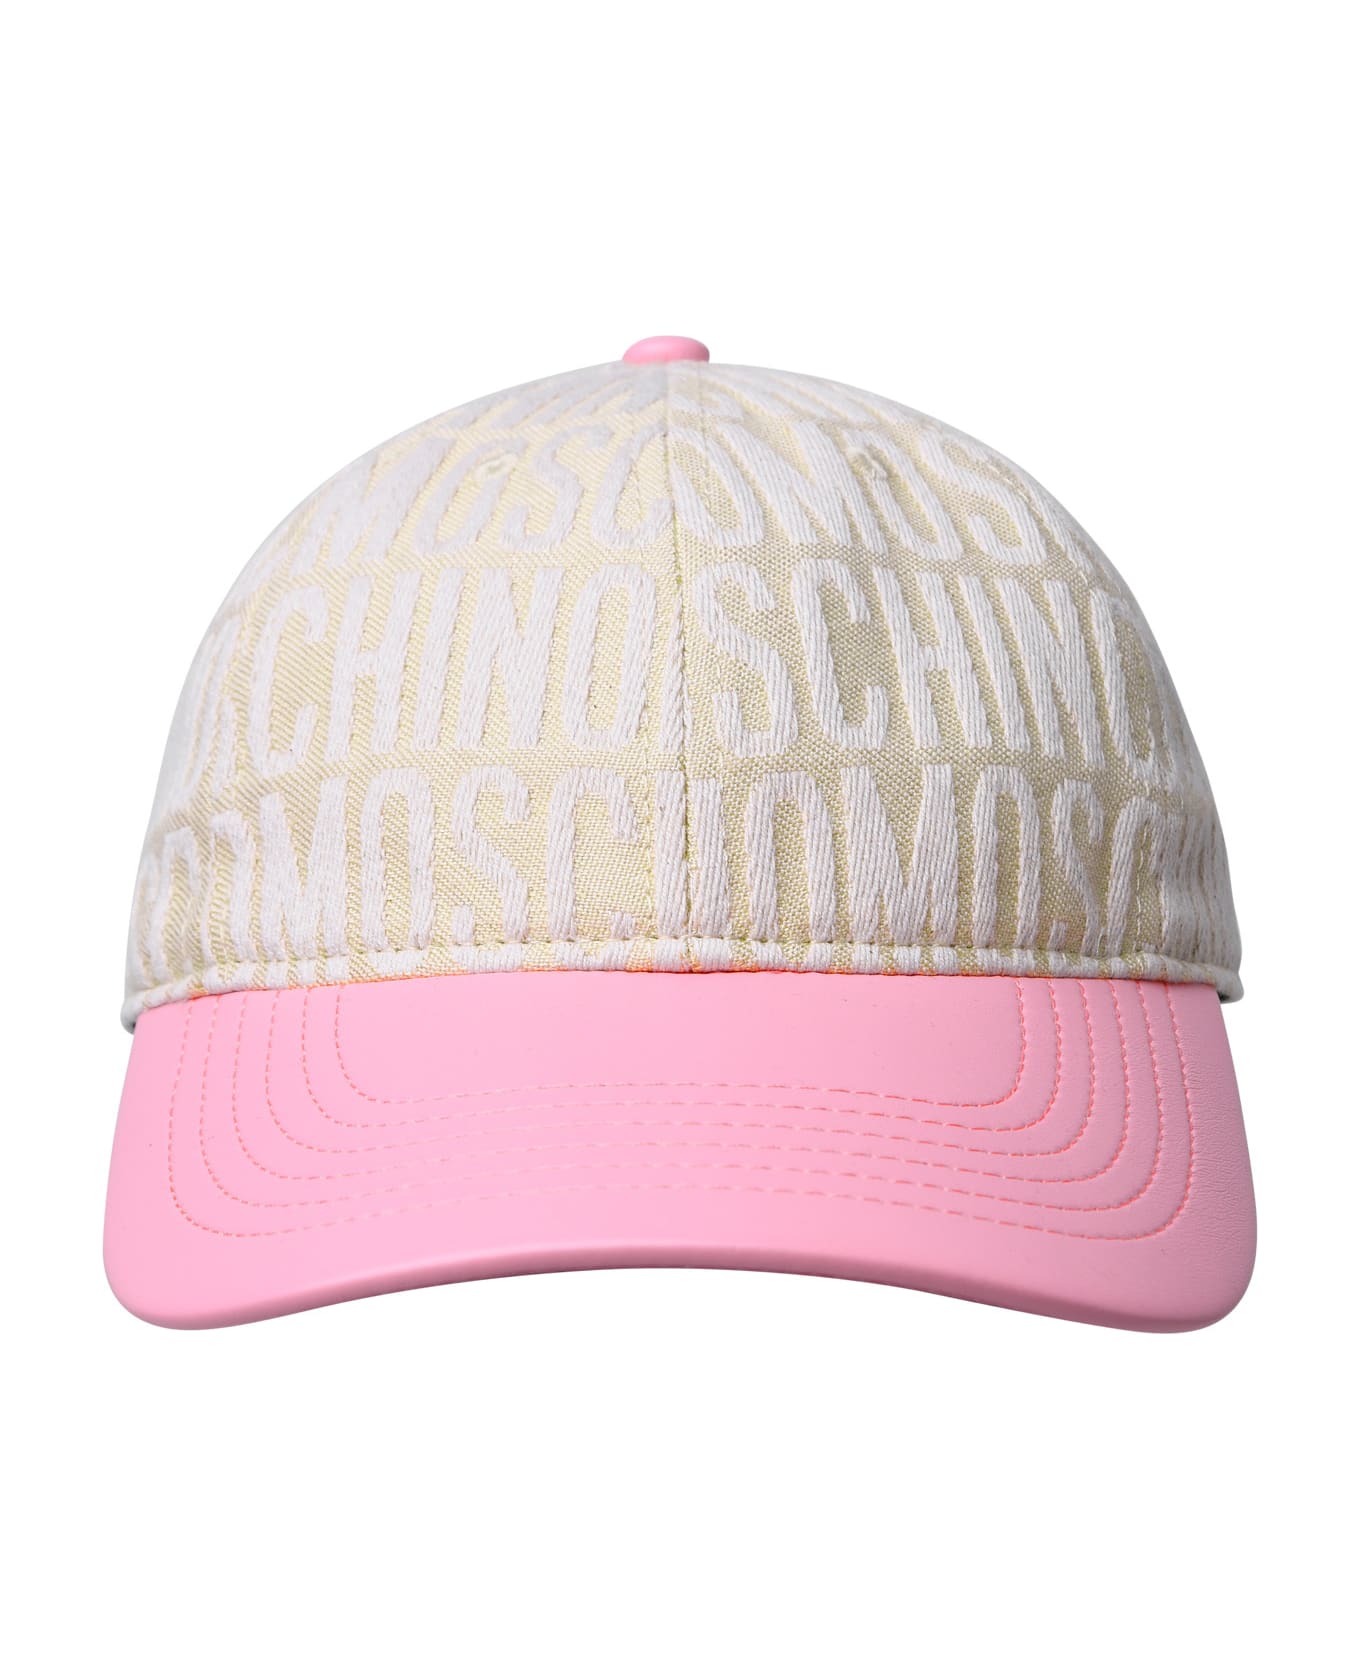 Moschino Hat In Ivory Cotton Blend - Ivory 帽子